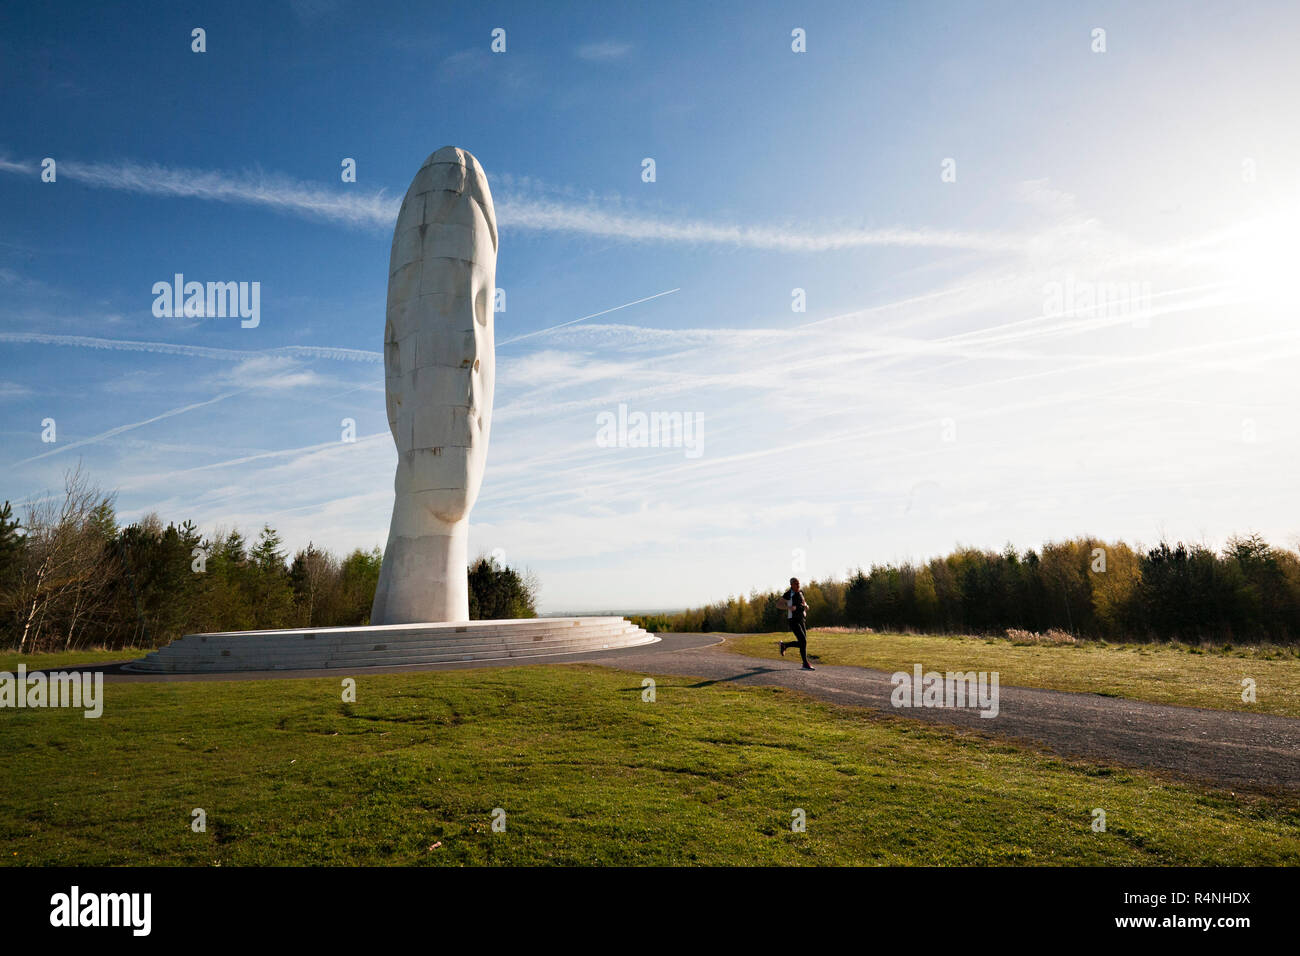 'The Dream' sculpture, St Helens, UK Opened in 2009, the winner of Channel 4's Big Art Project, a 20 metre high 'girl' made of marble by Jaume Plensa. Stock Photo